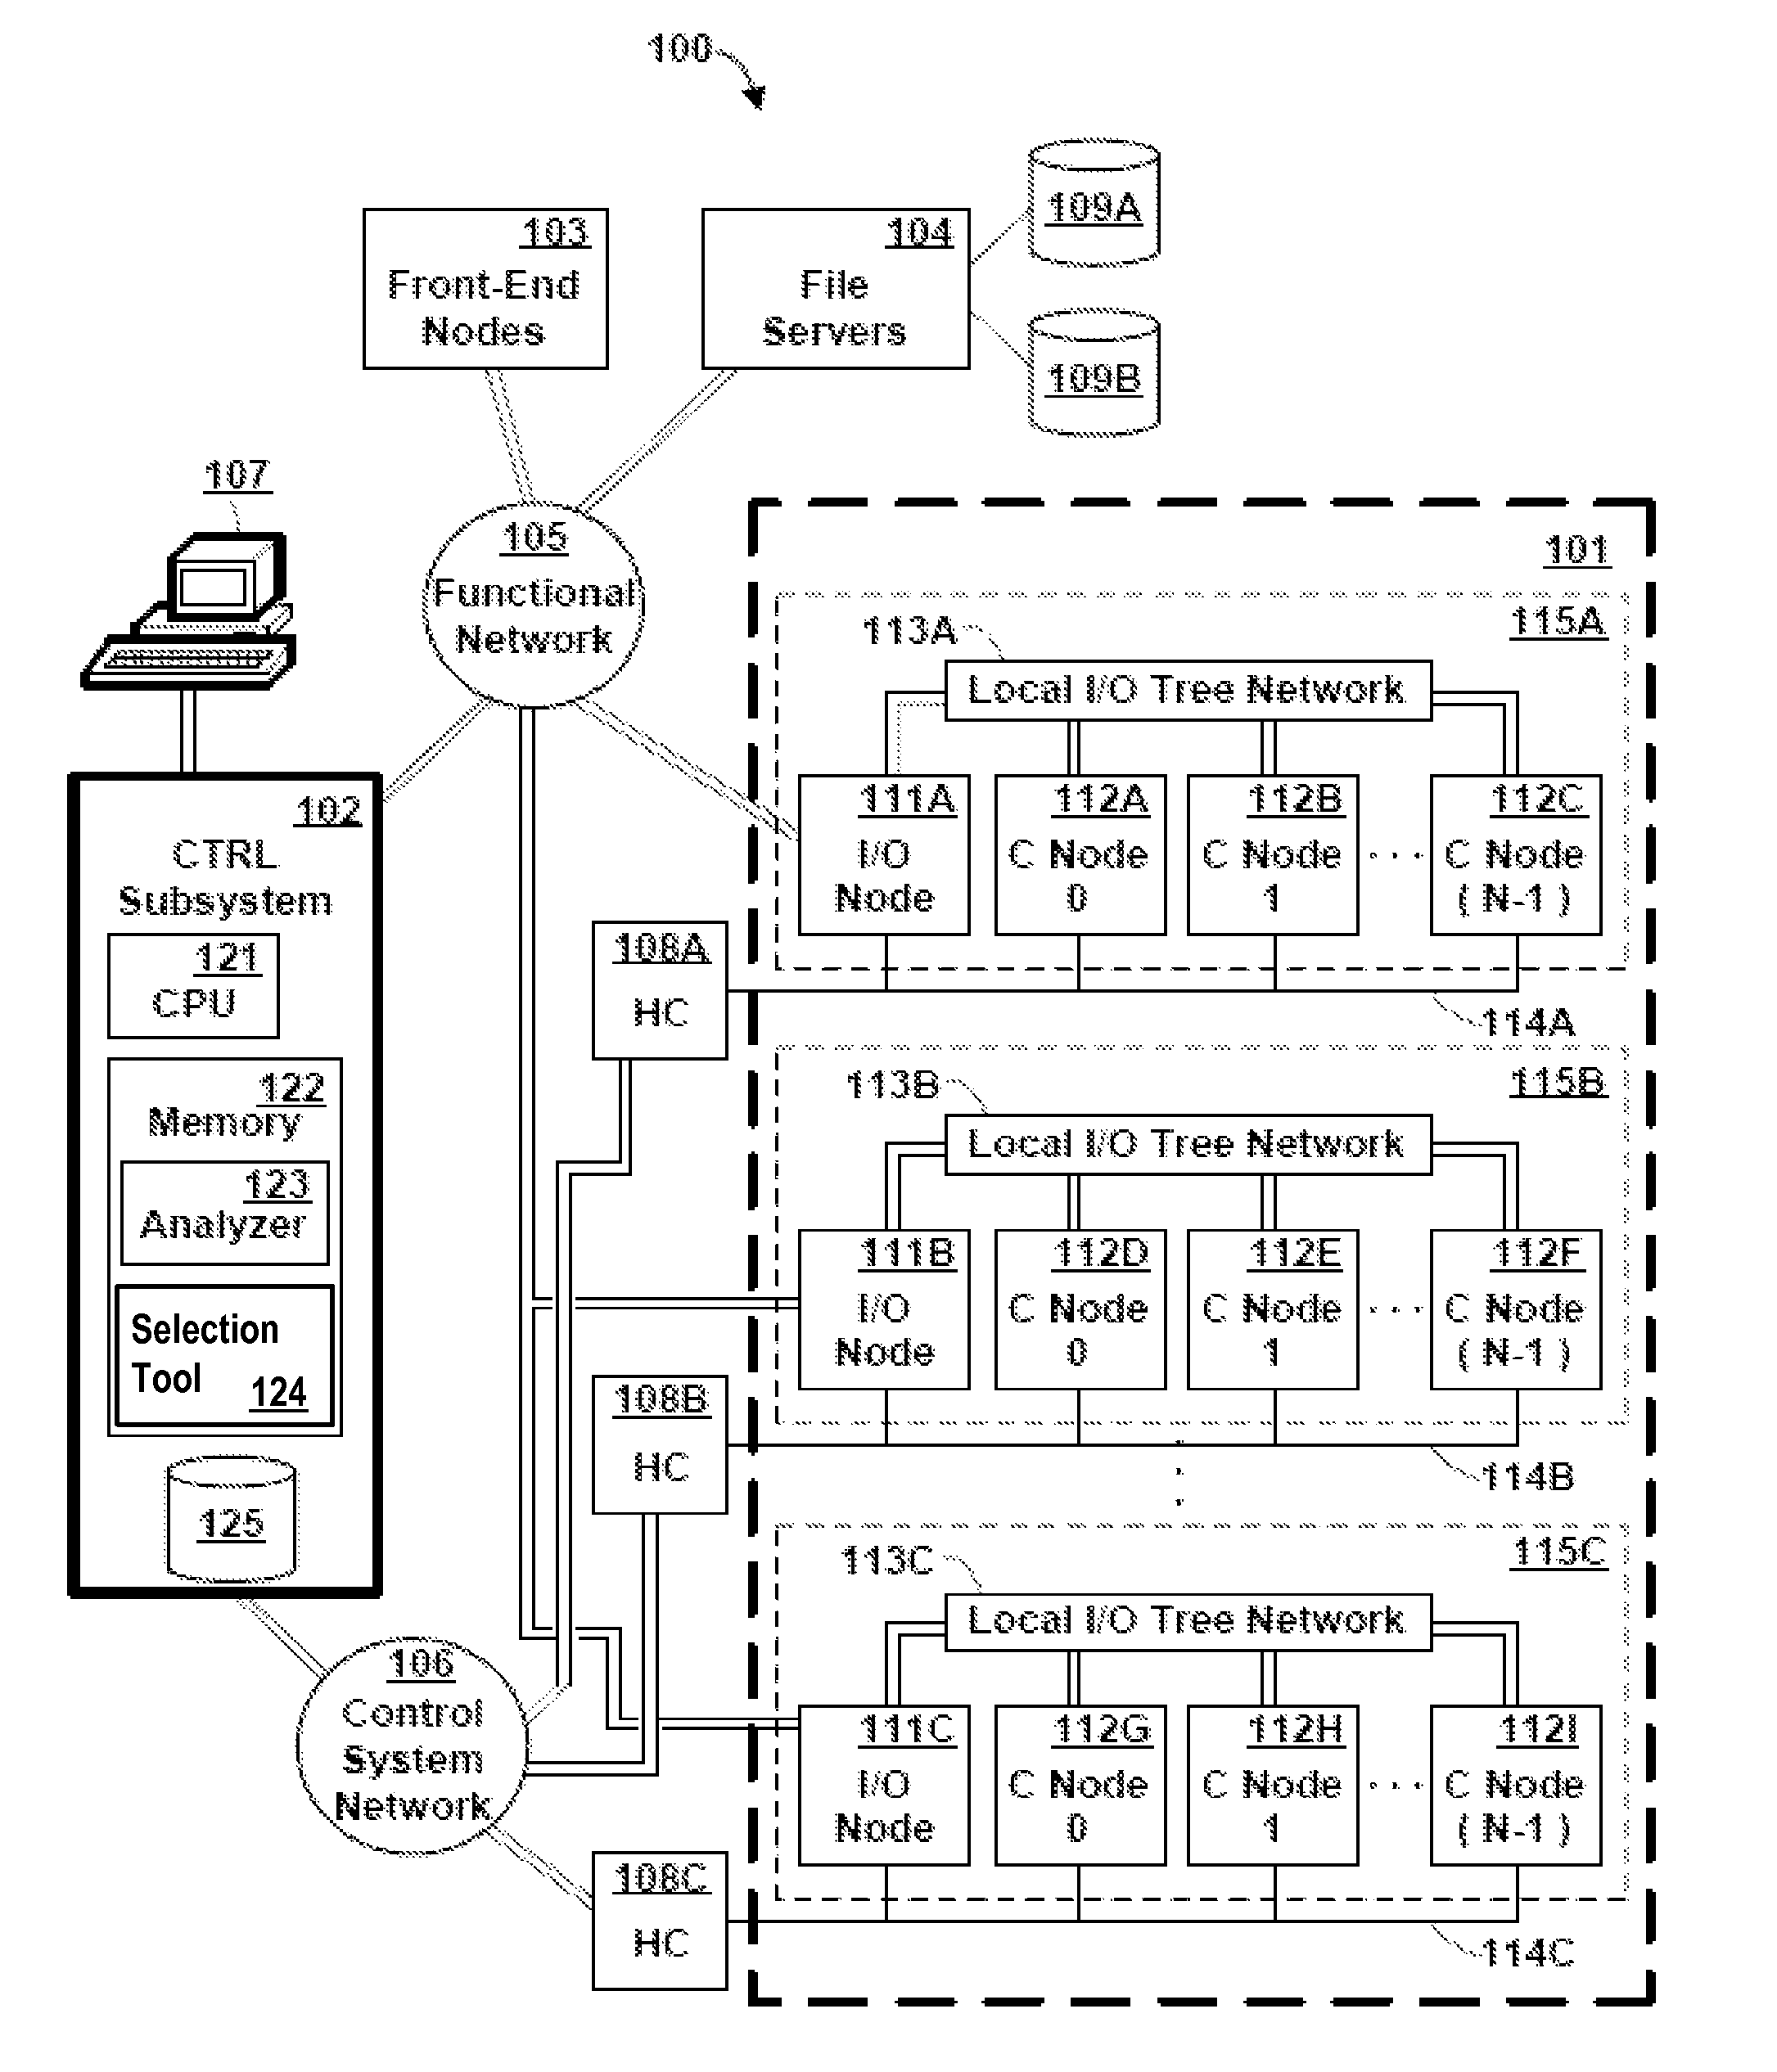 Analysis and selection of optimal function implementations in massively parallel computer